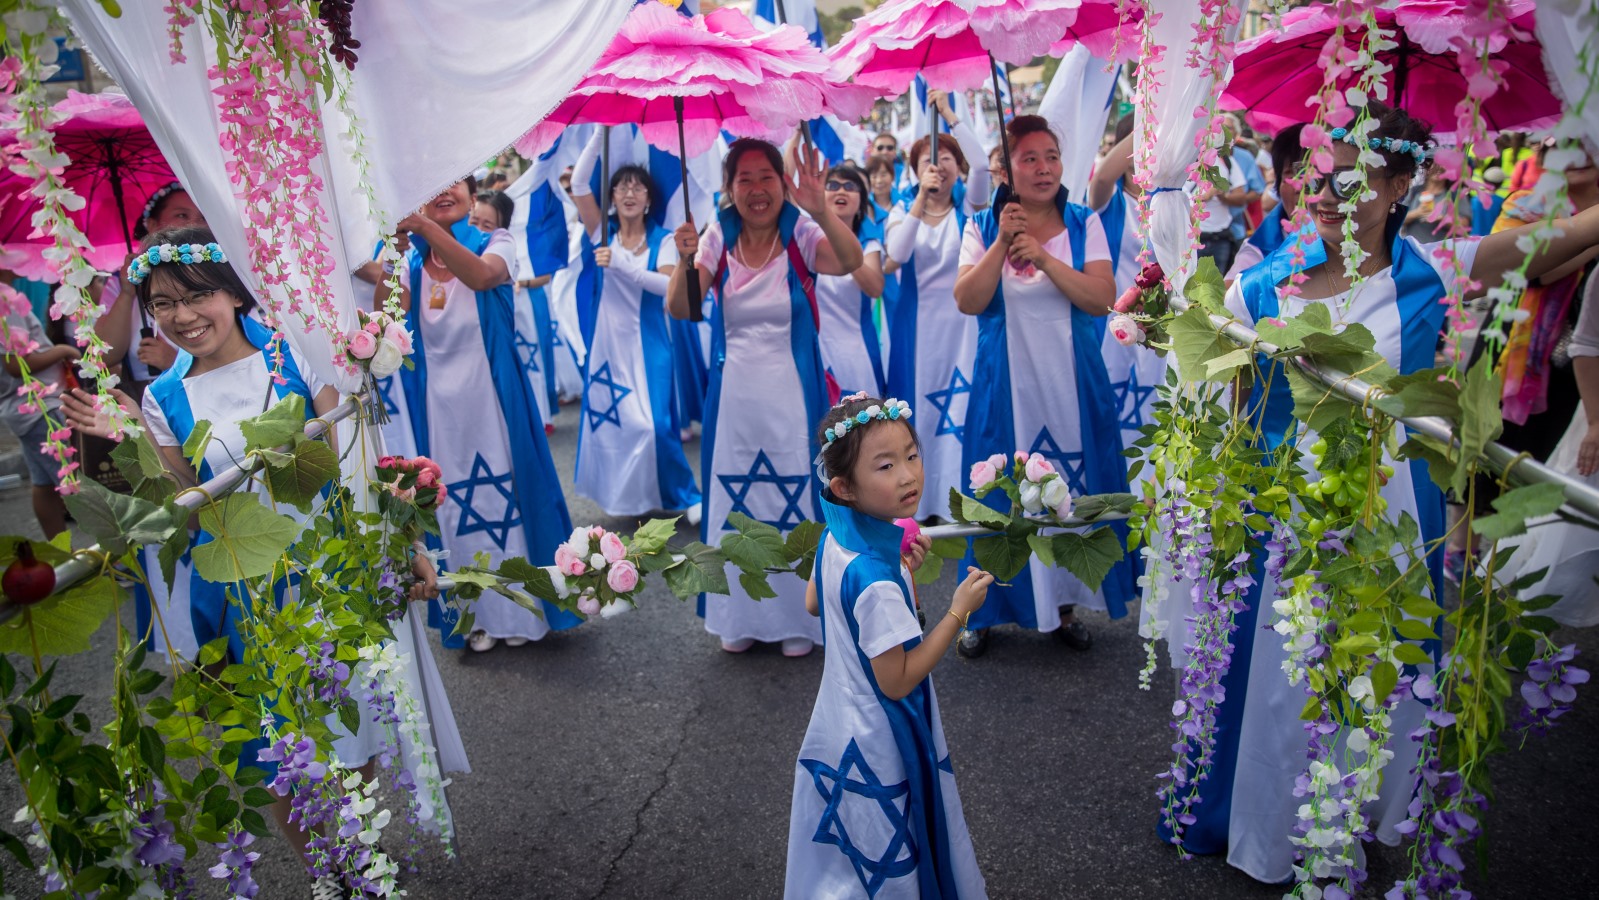 Christians from 100 nations celebrate Sukkot in Israel ISRAEL21c